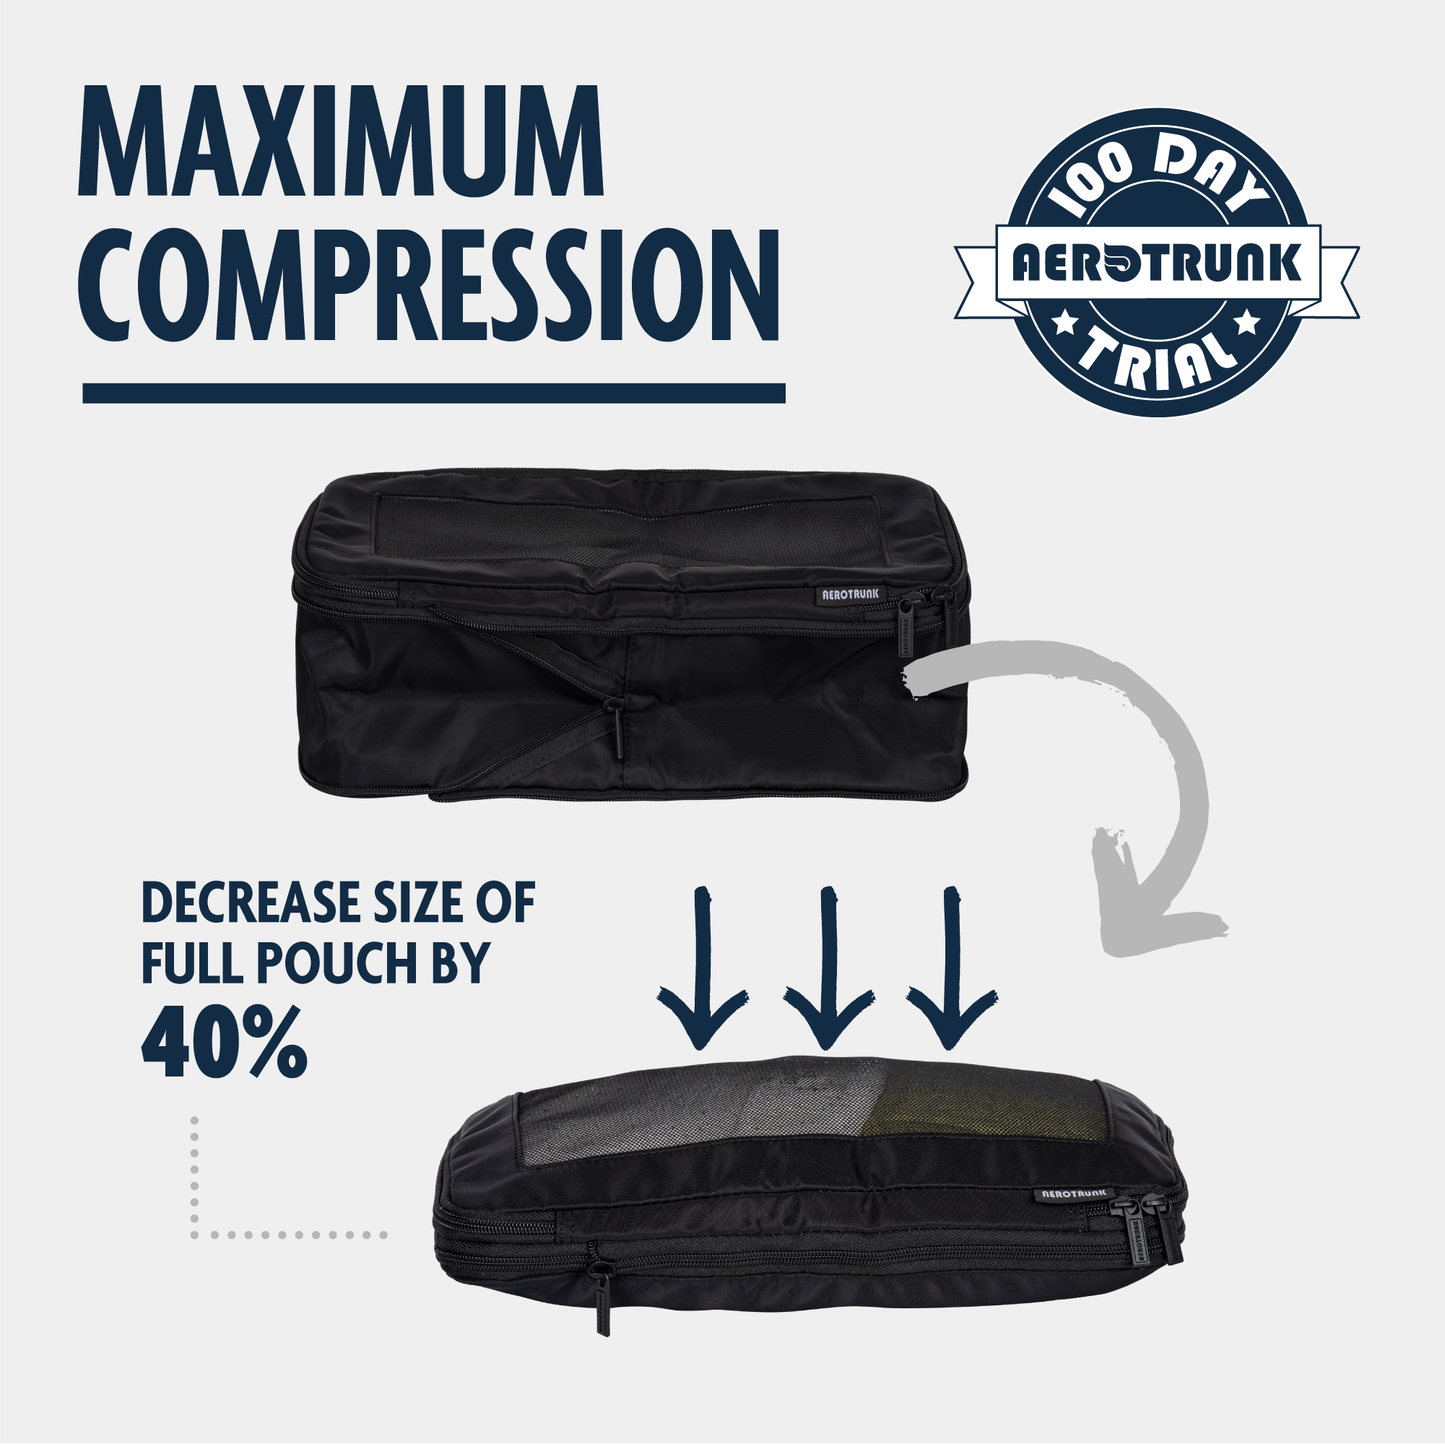 Aerotrunk Collapsible Compression Packing Cubes (4-pack)